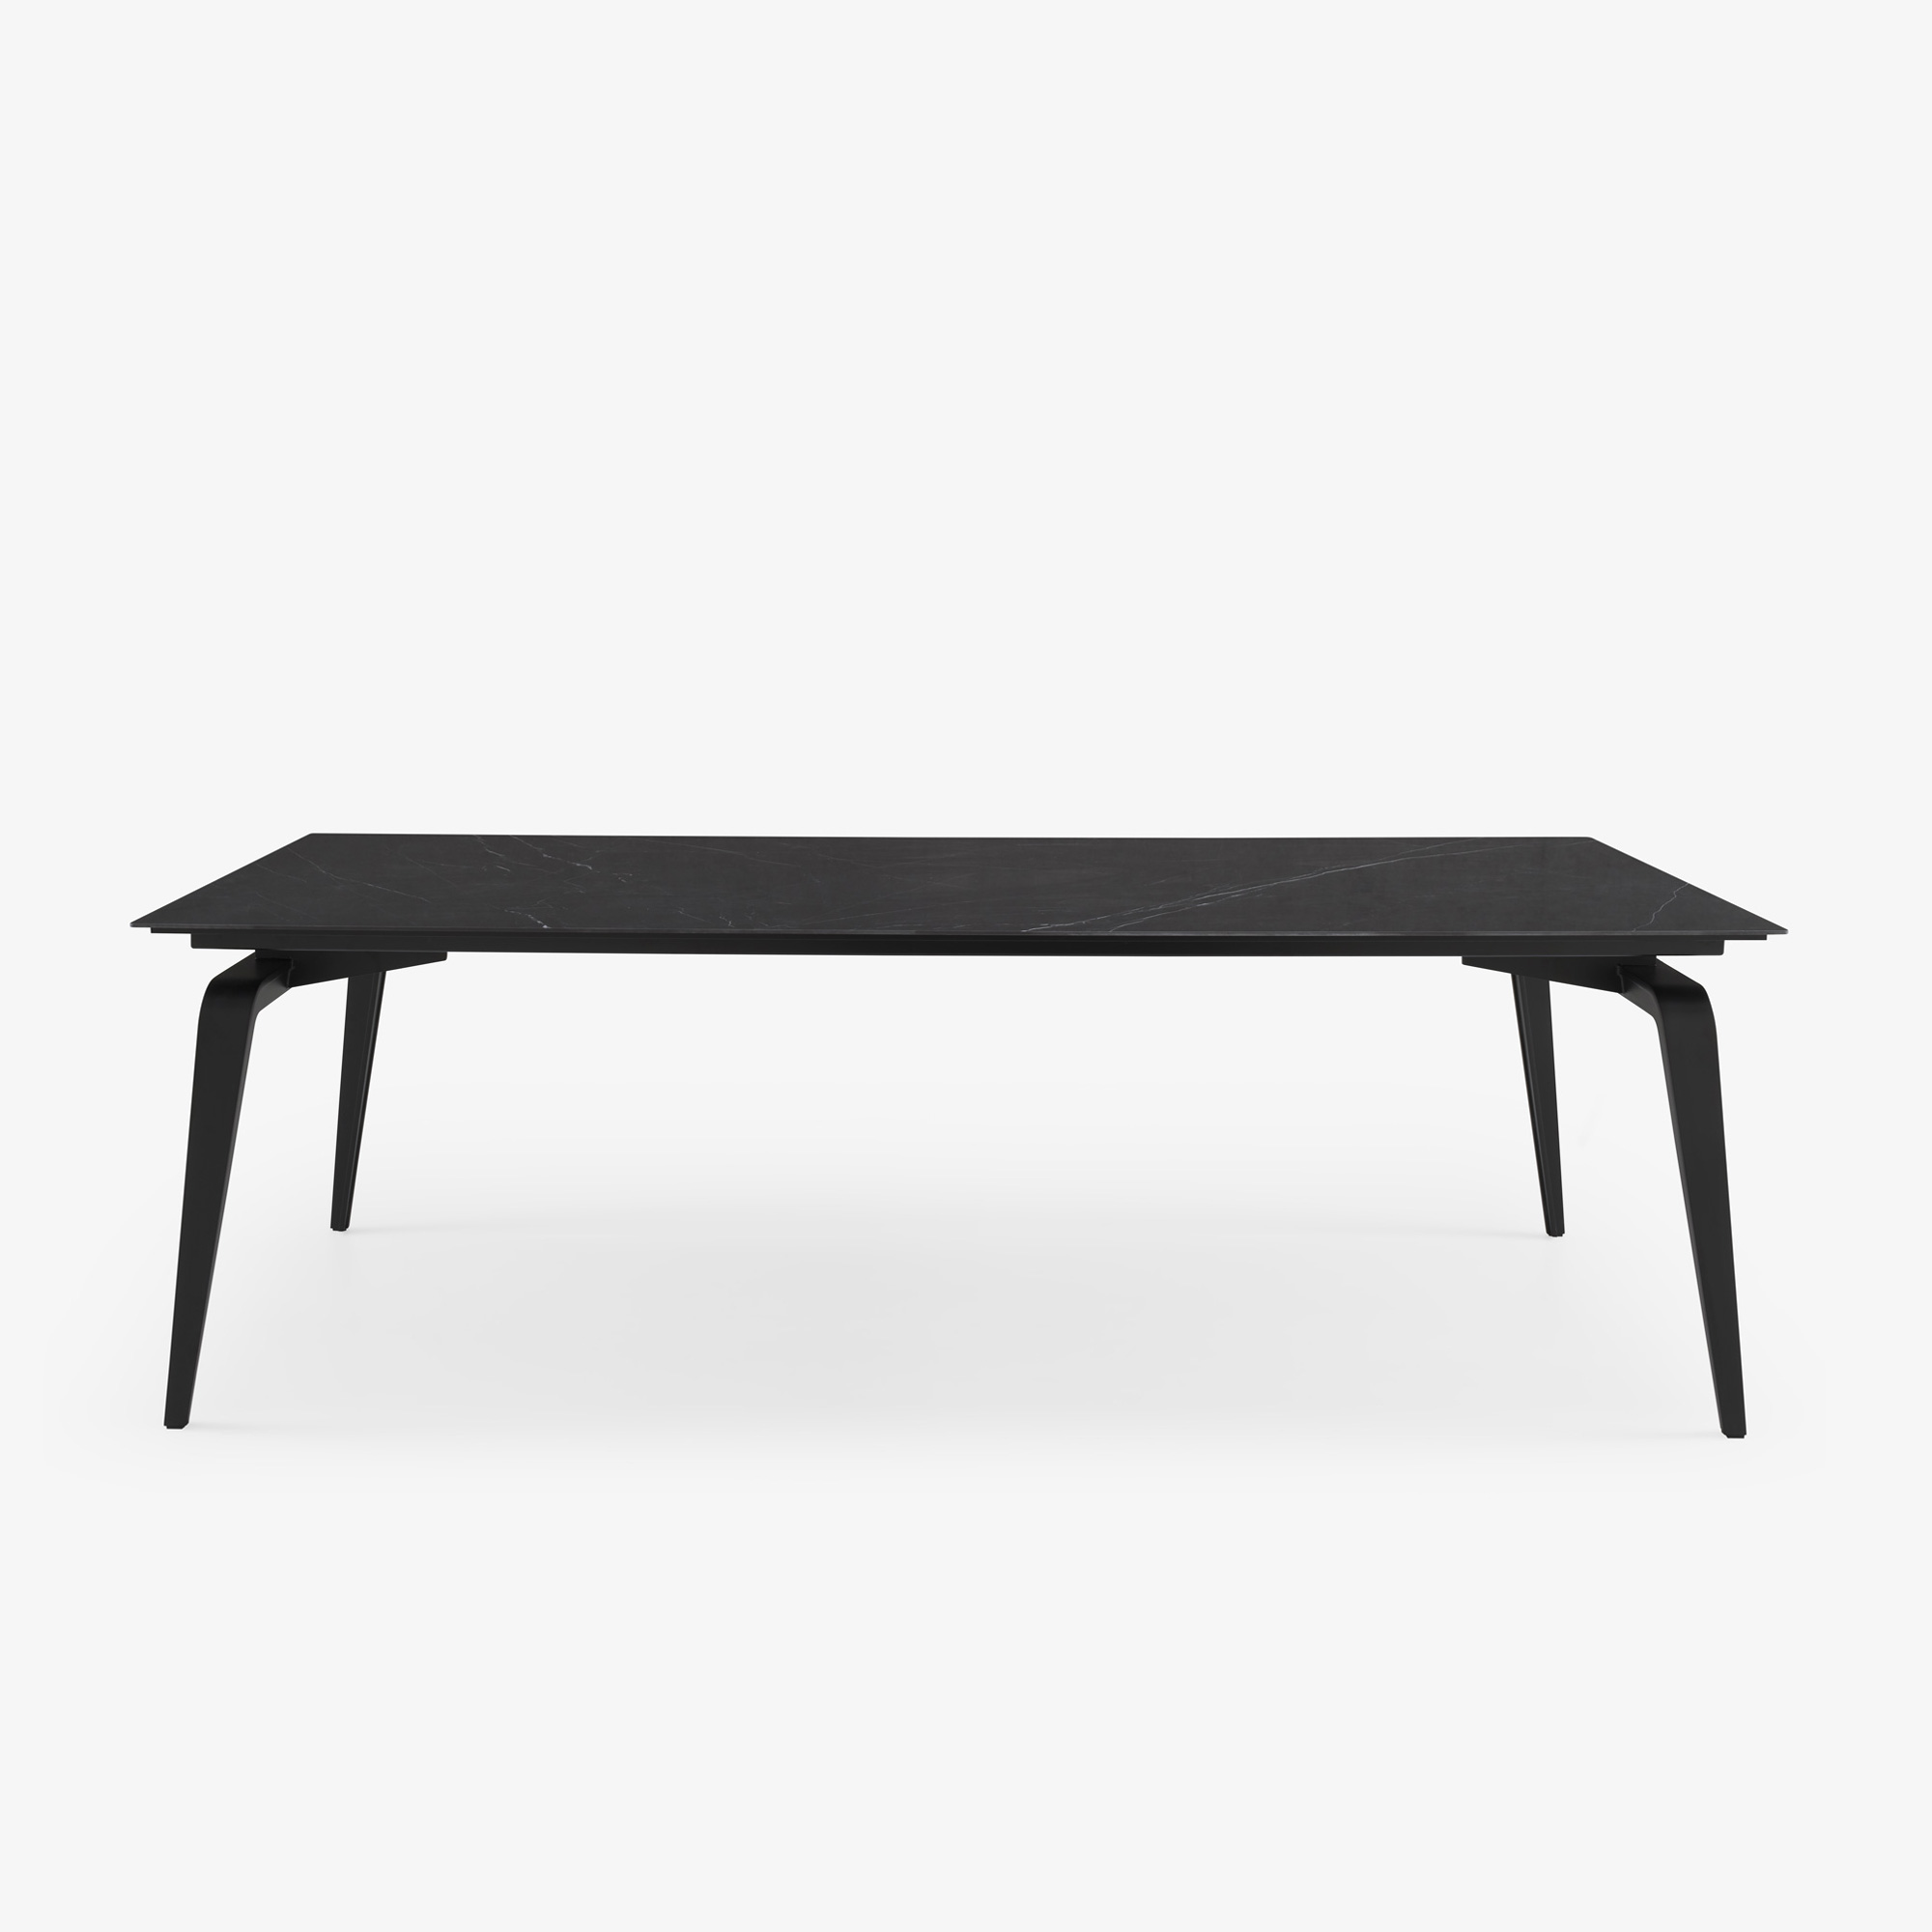 Image RECTANGULAR DINING TABLE BLACK LACQUERED BASE 